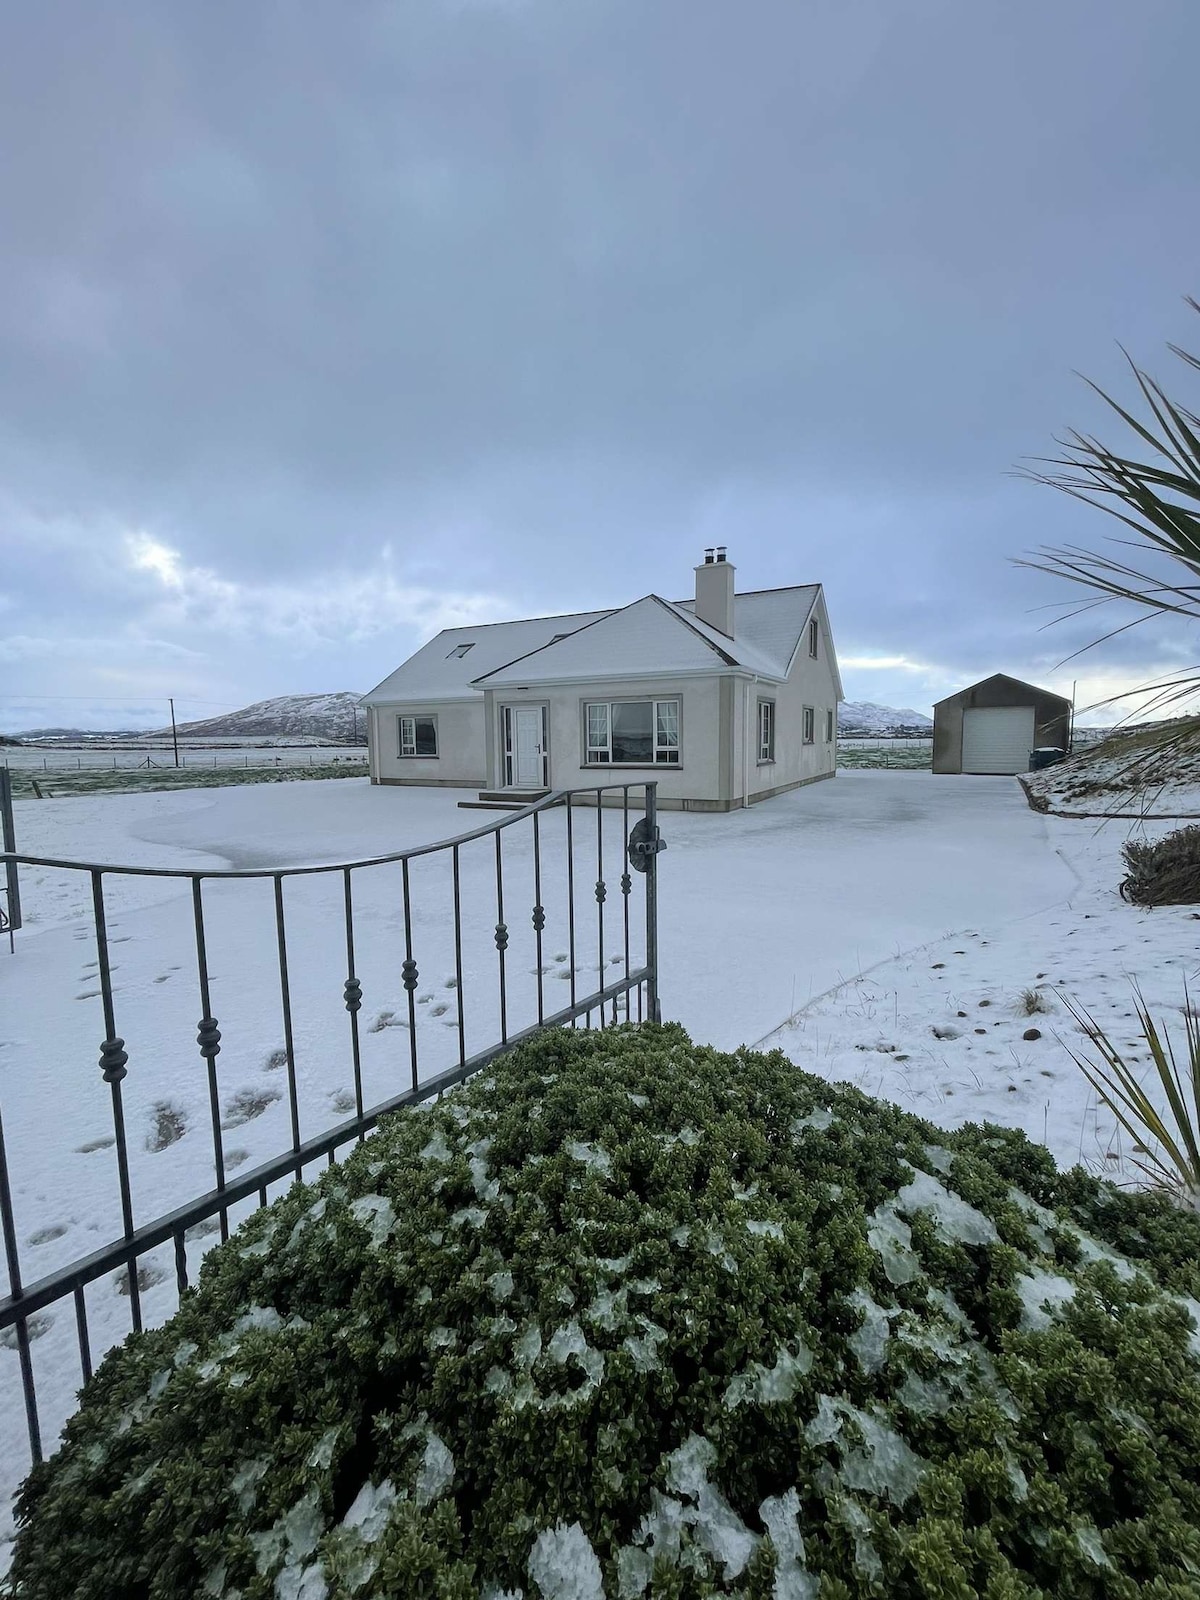 Holiday Home in Clonmany, Tullagh Bay Beach House.